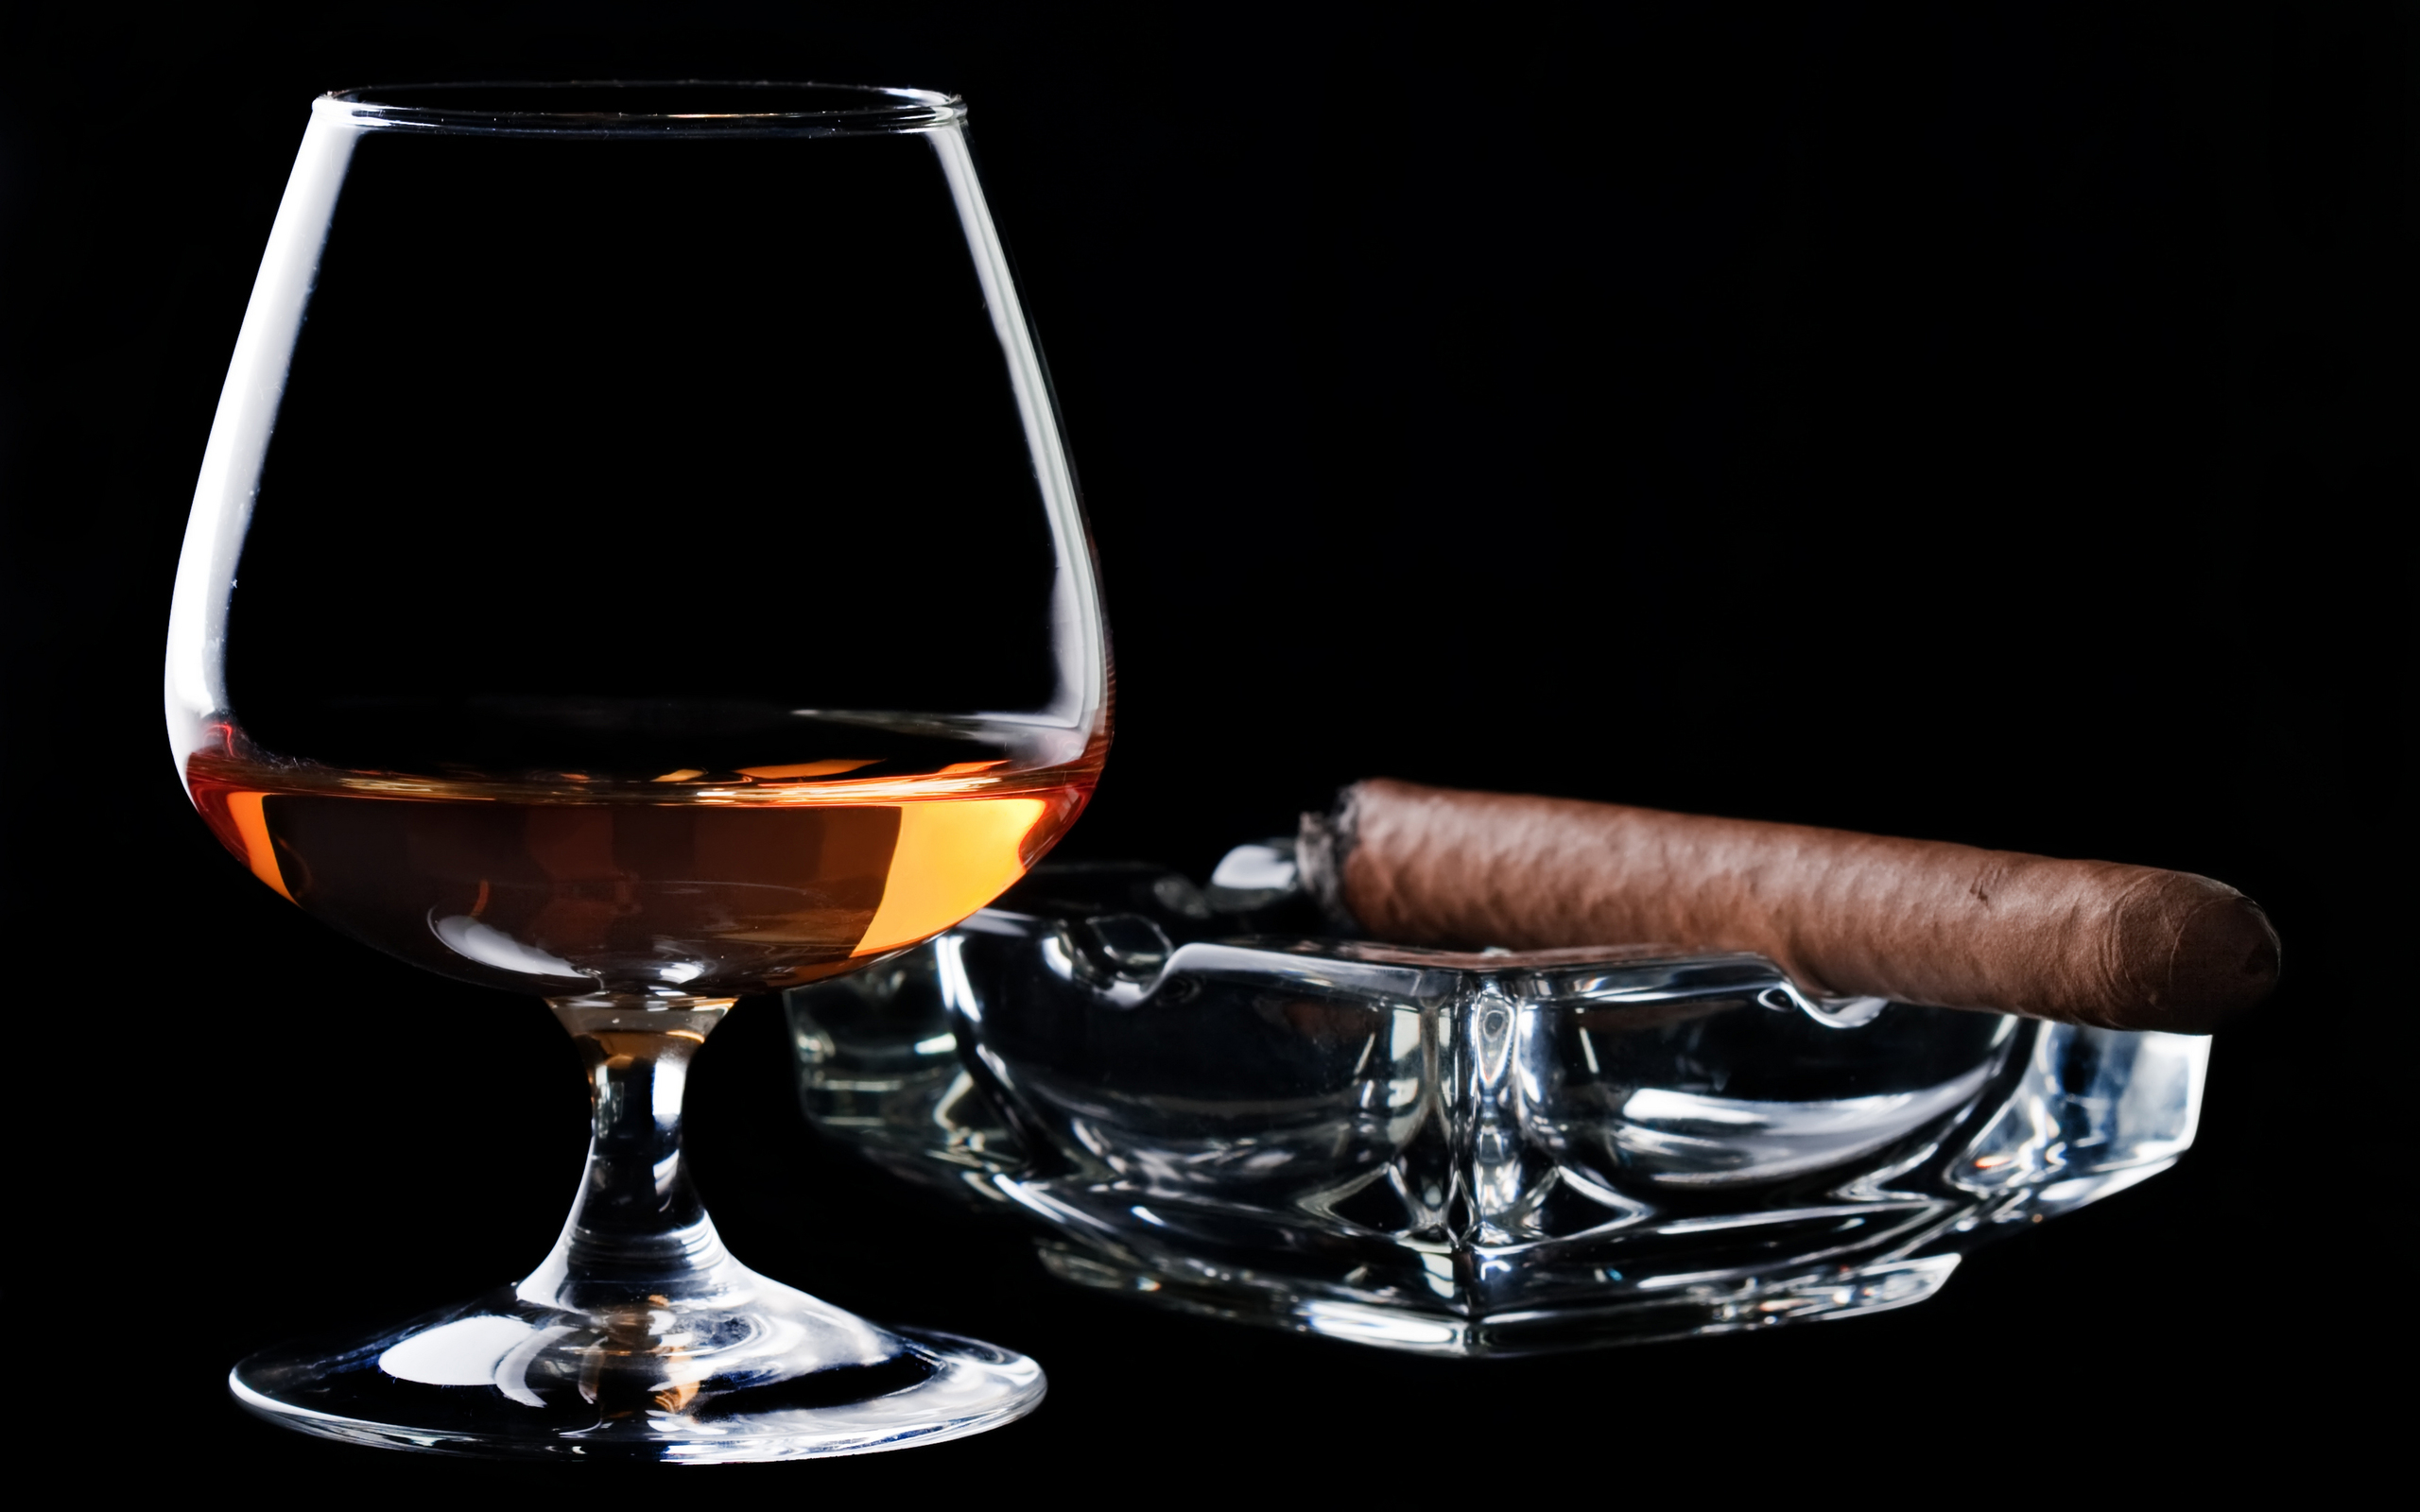 Brandy Glass And Cigar On Ashtray Widescreen Wallpaper Wide